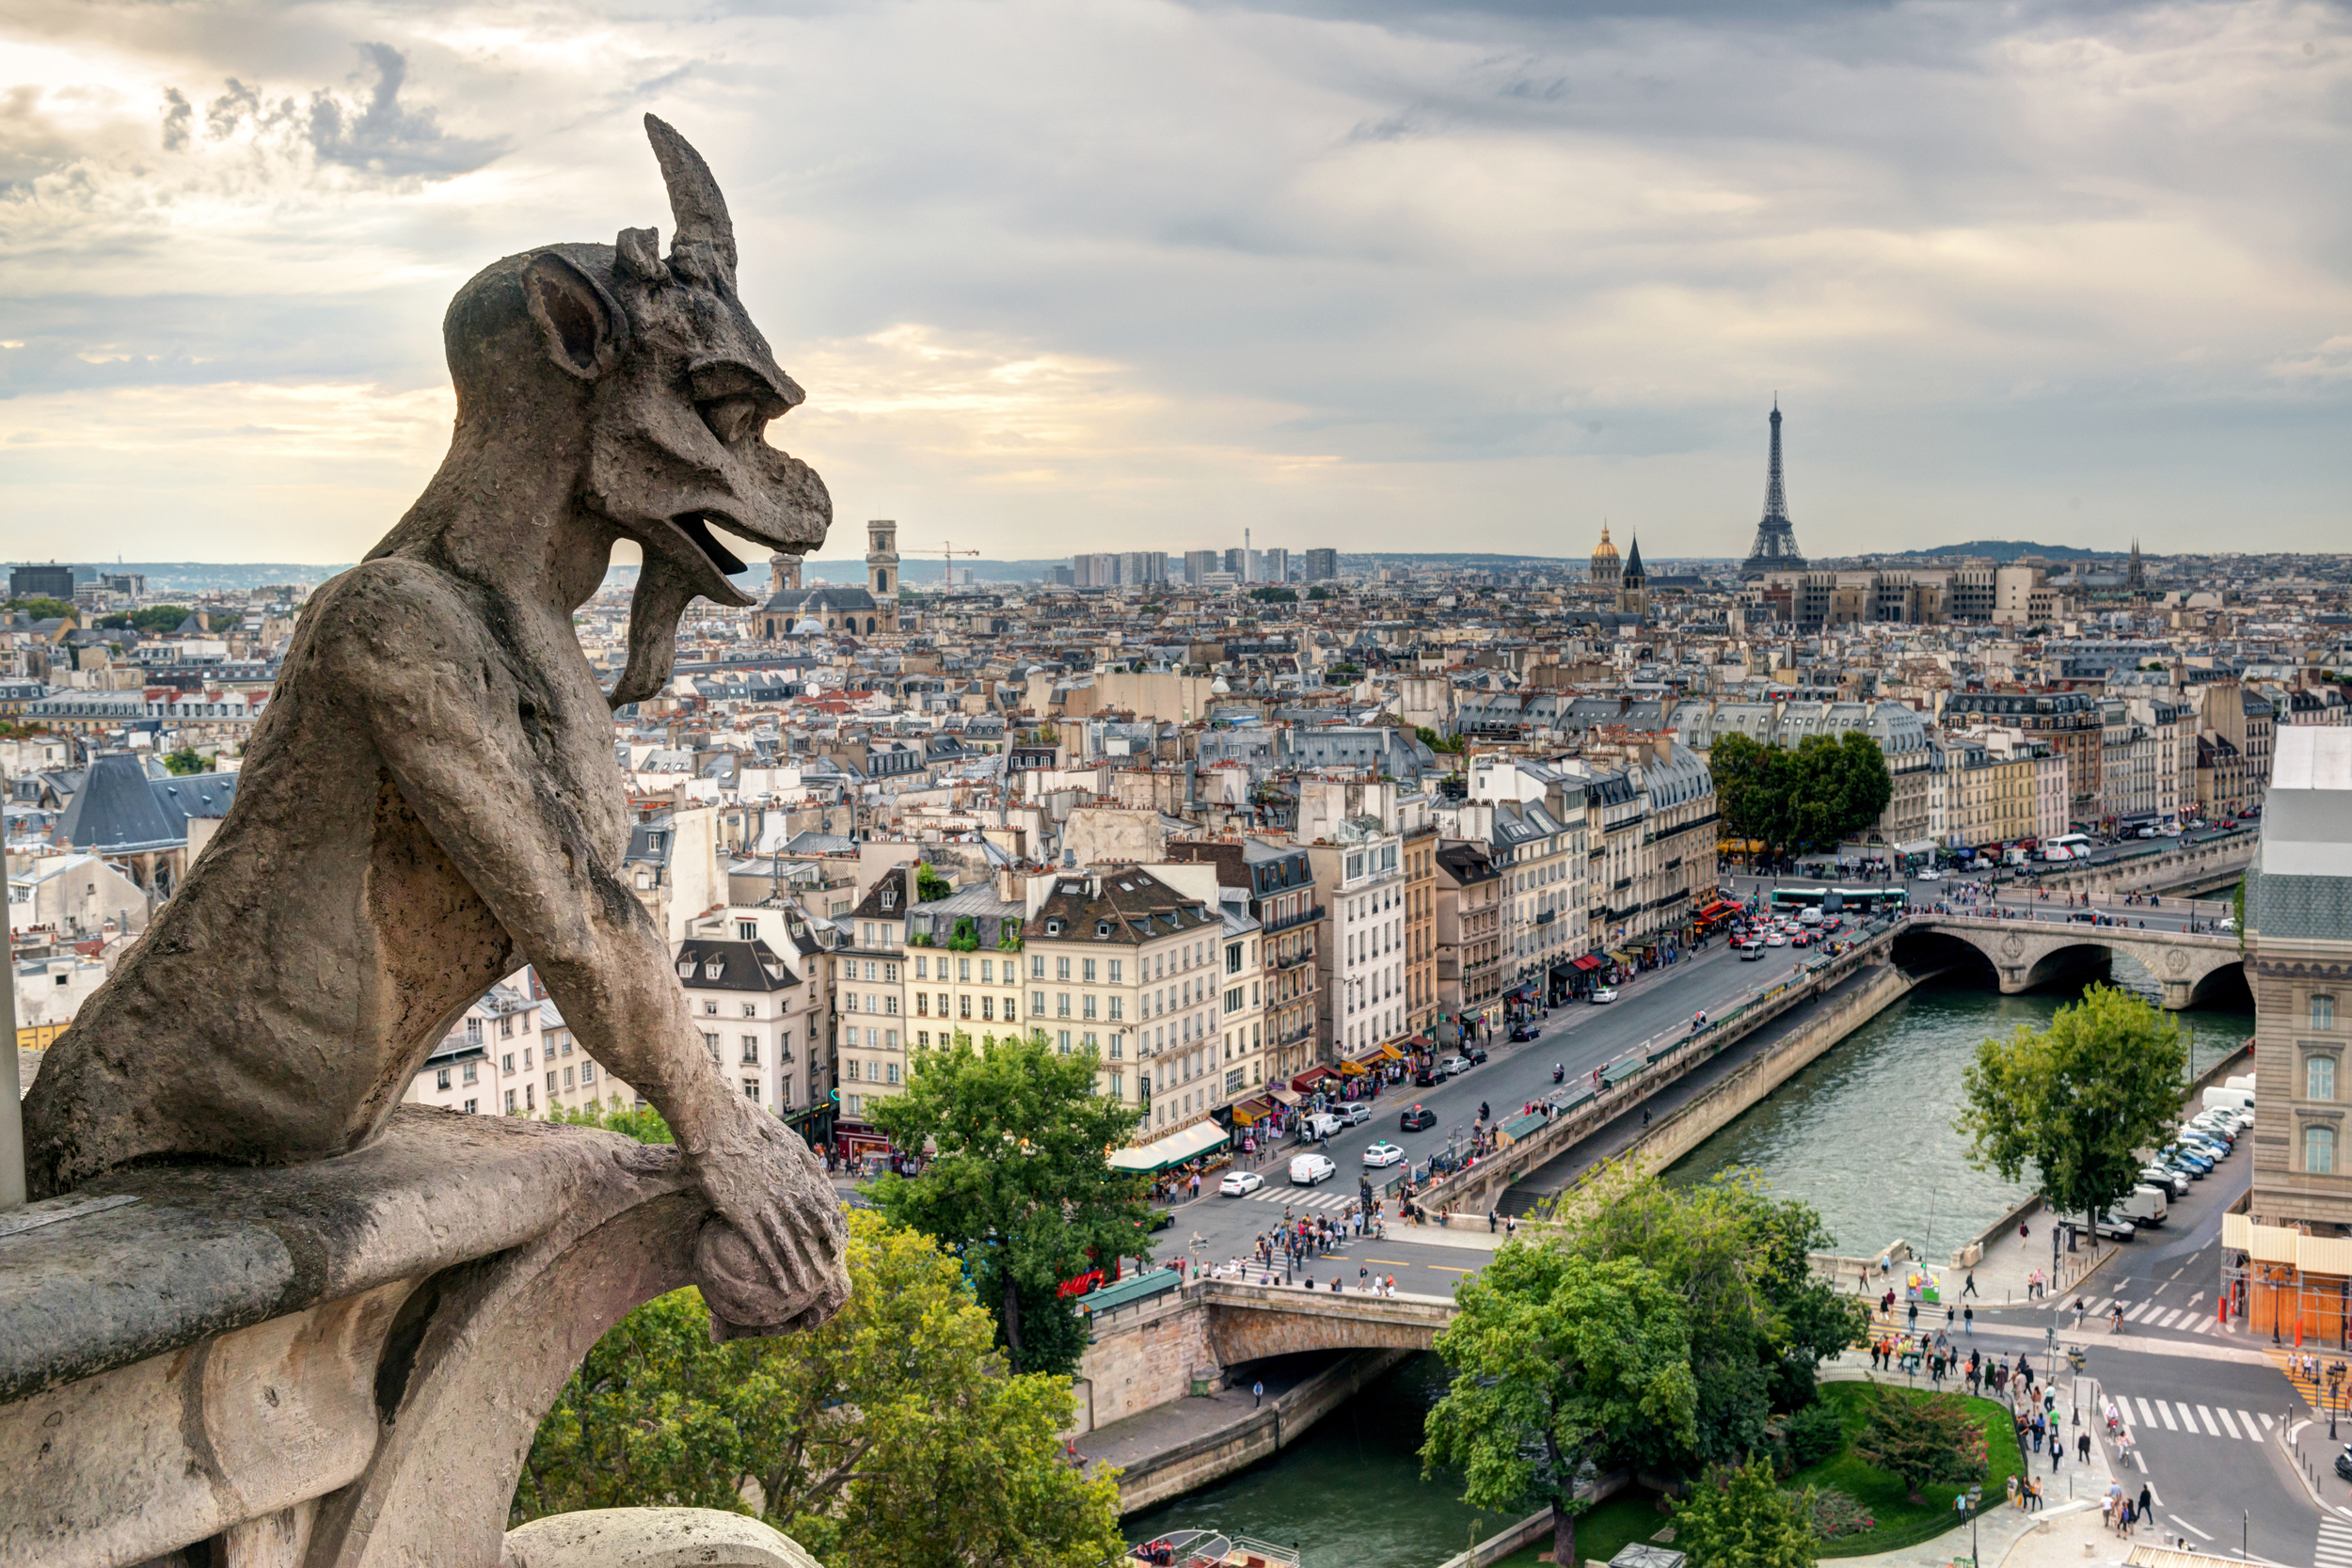 A gargoyle overlooking the River Seine and city